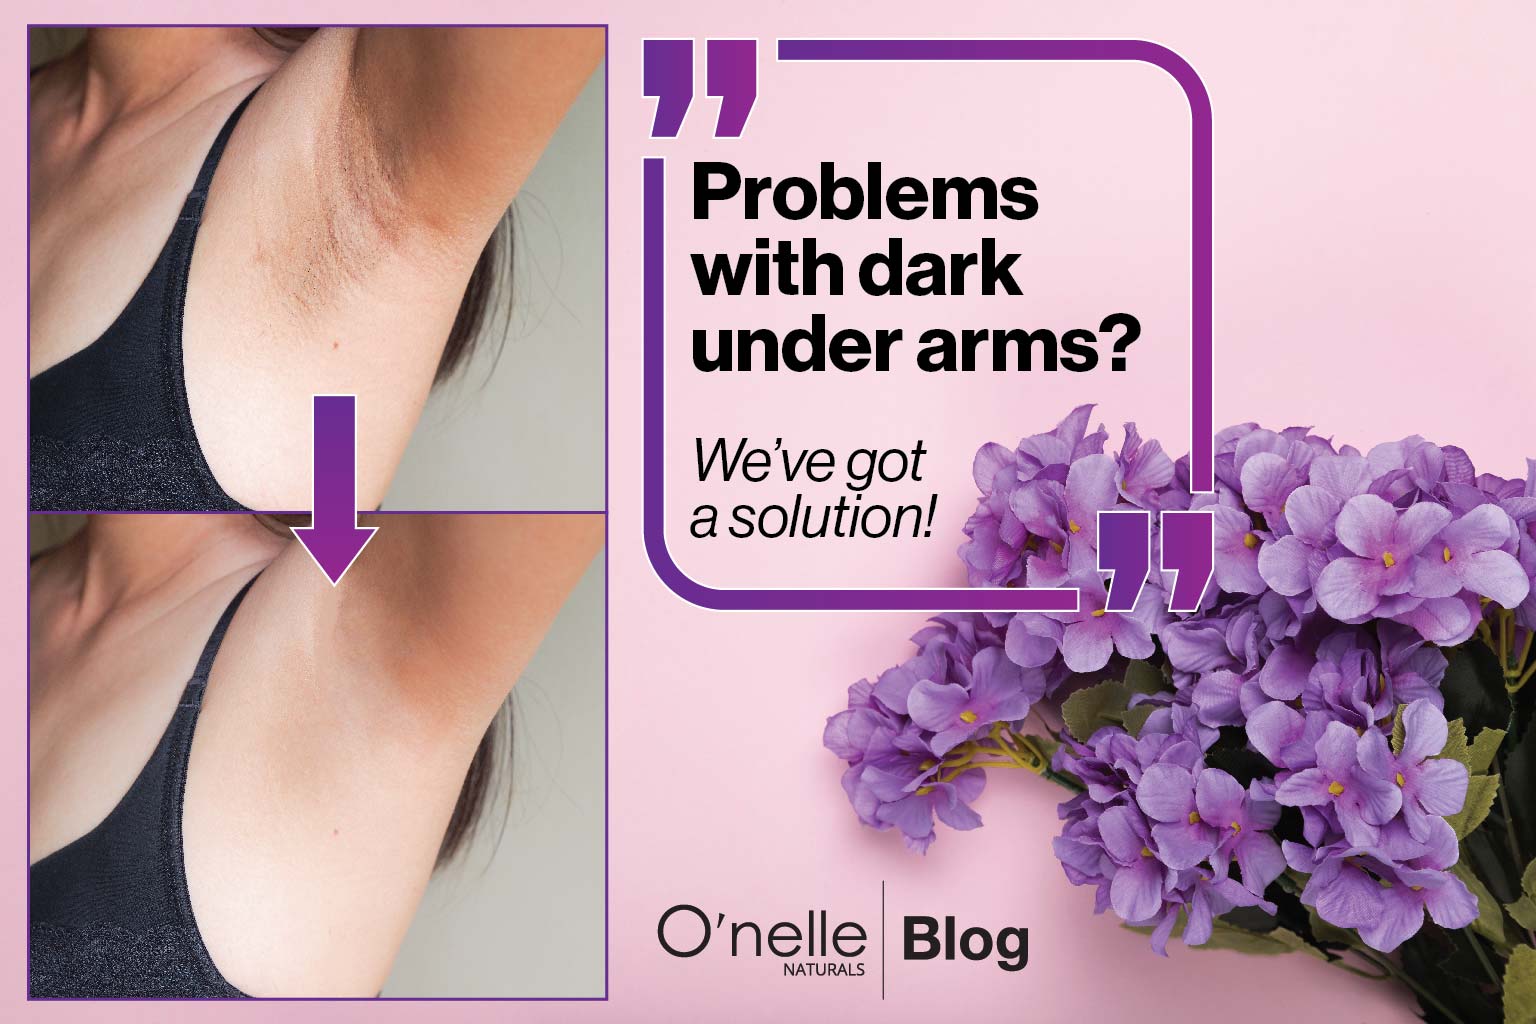 Problems with dark under arms? We've got a solution!